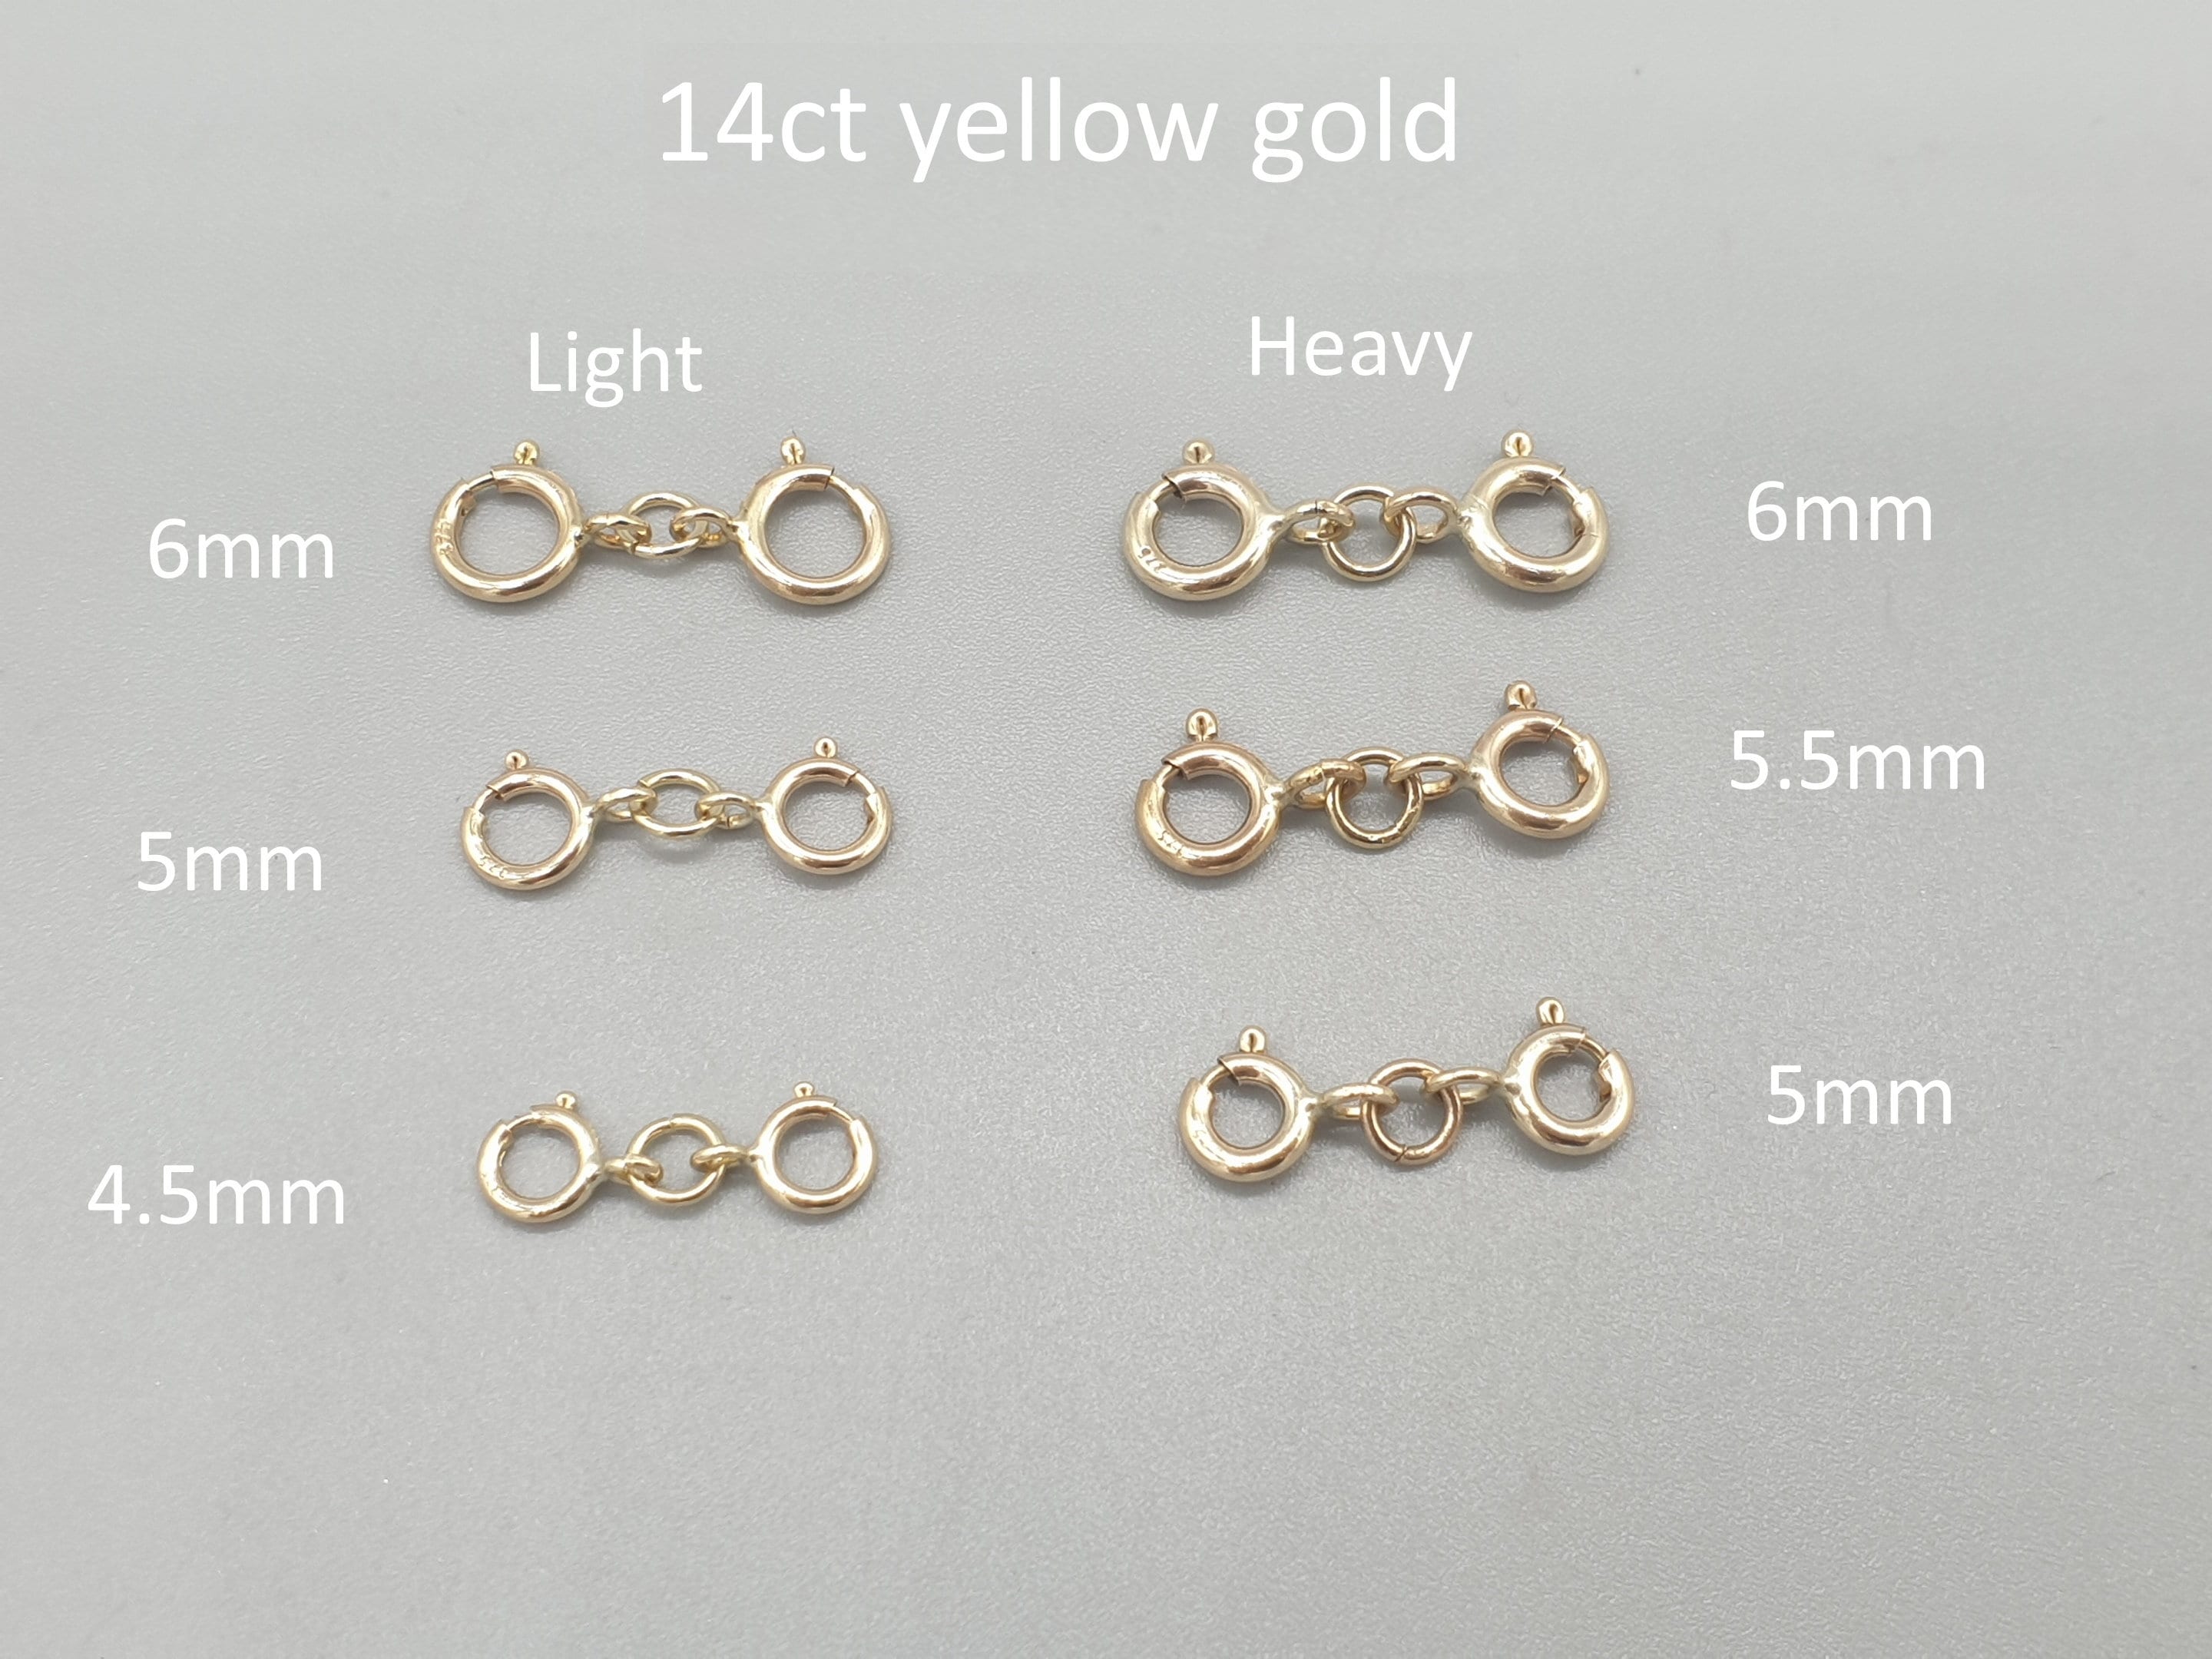 Spring Ring Jewelry Clasp 4.5mm 14 Karat Solid Yellow Gold